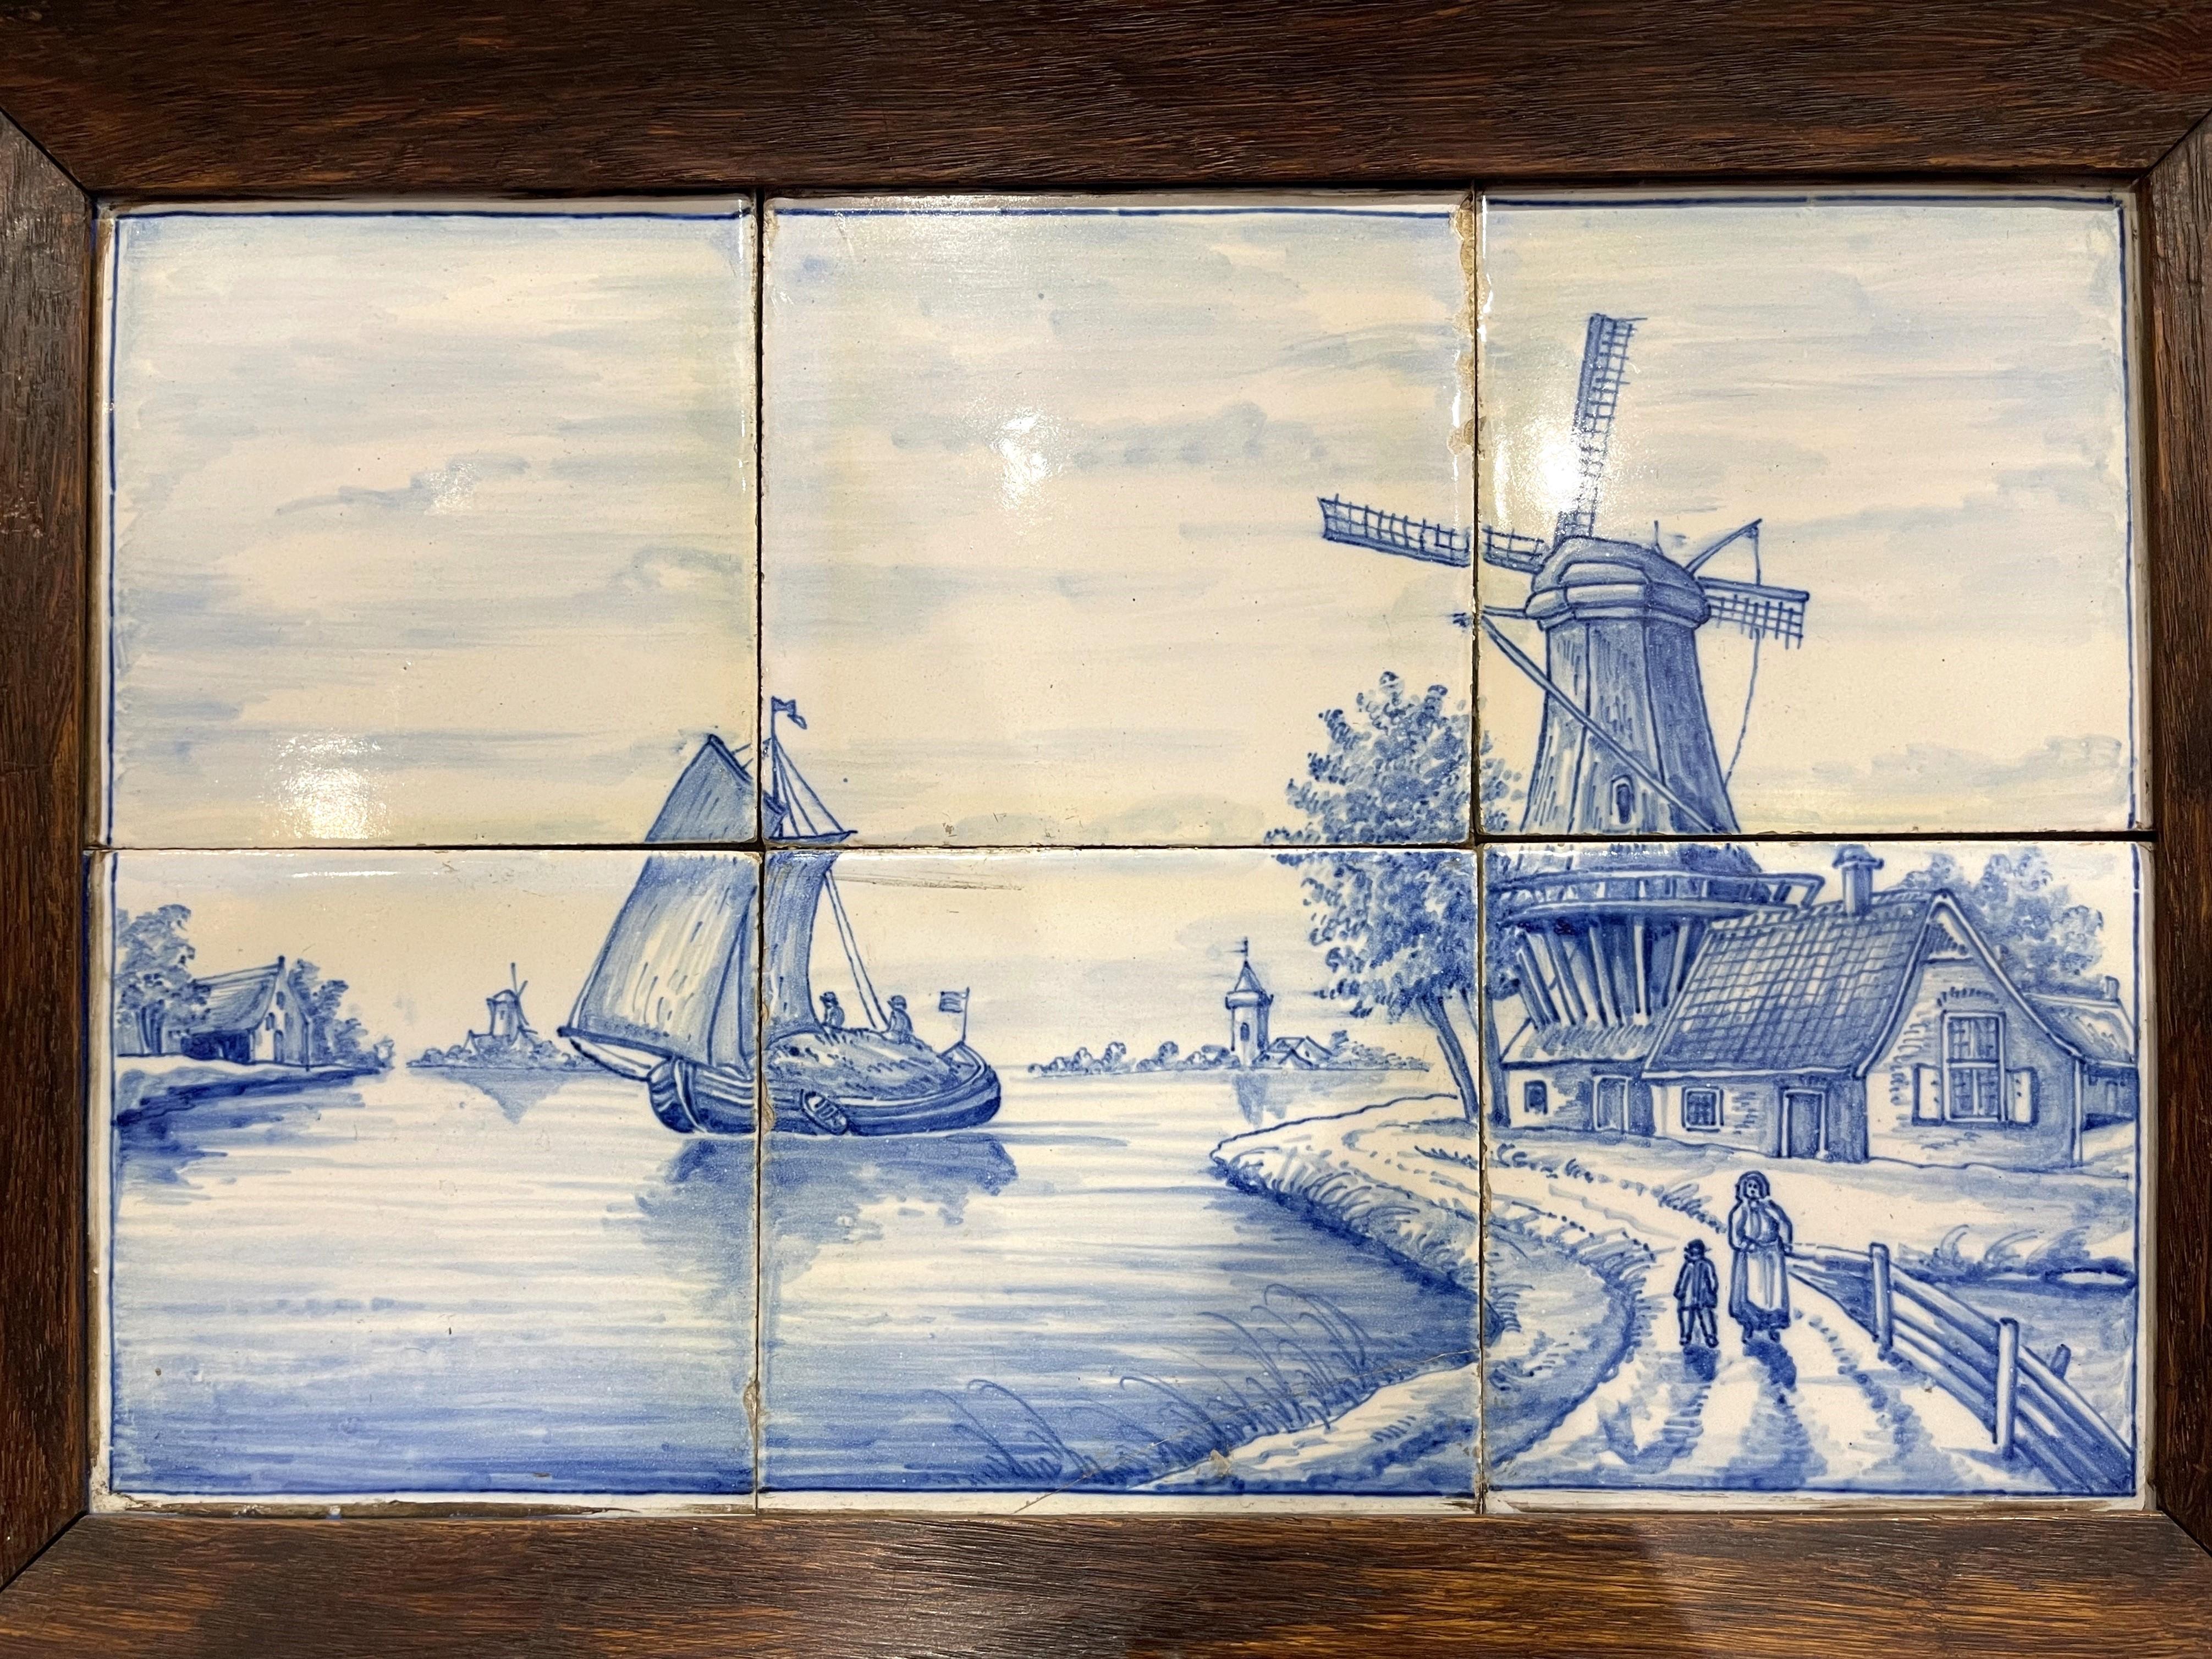 Hand-Crafted 19th Century French Blue and White Painted Faience Delft Tile in Oak Frame